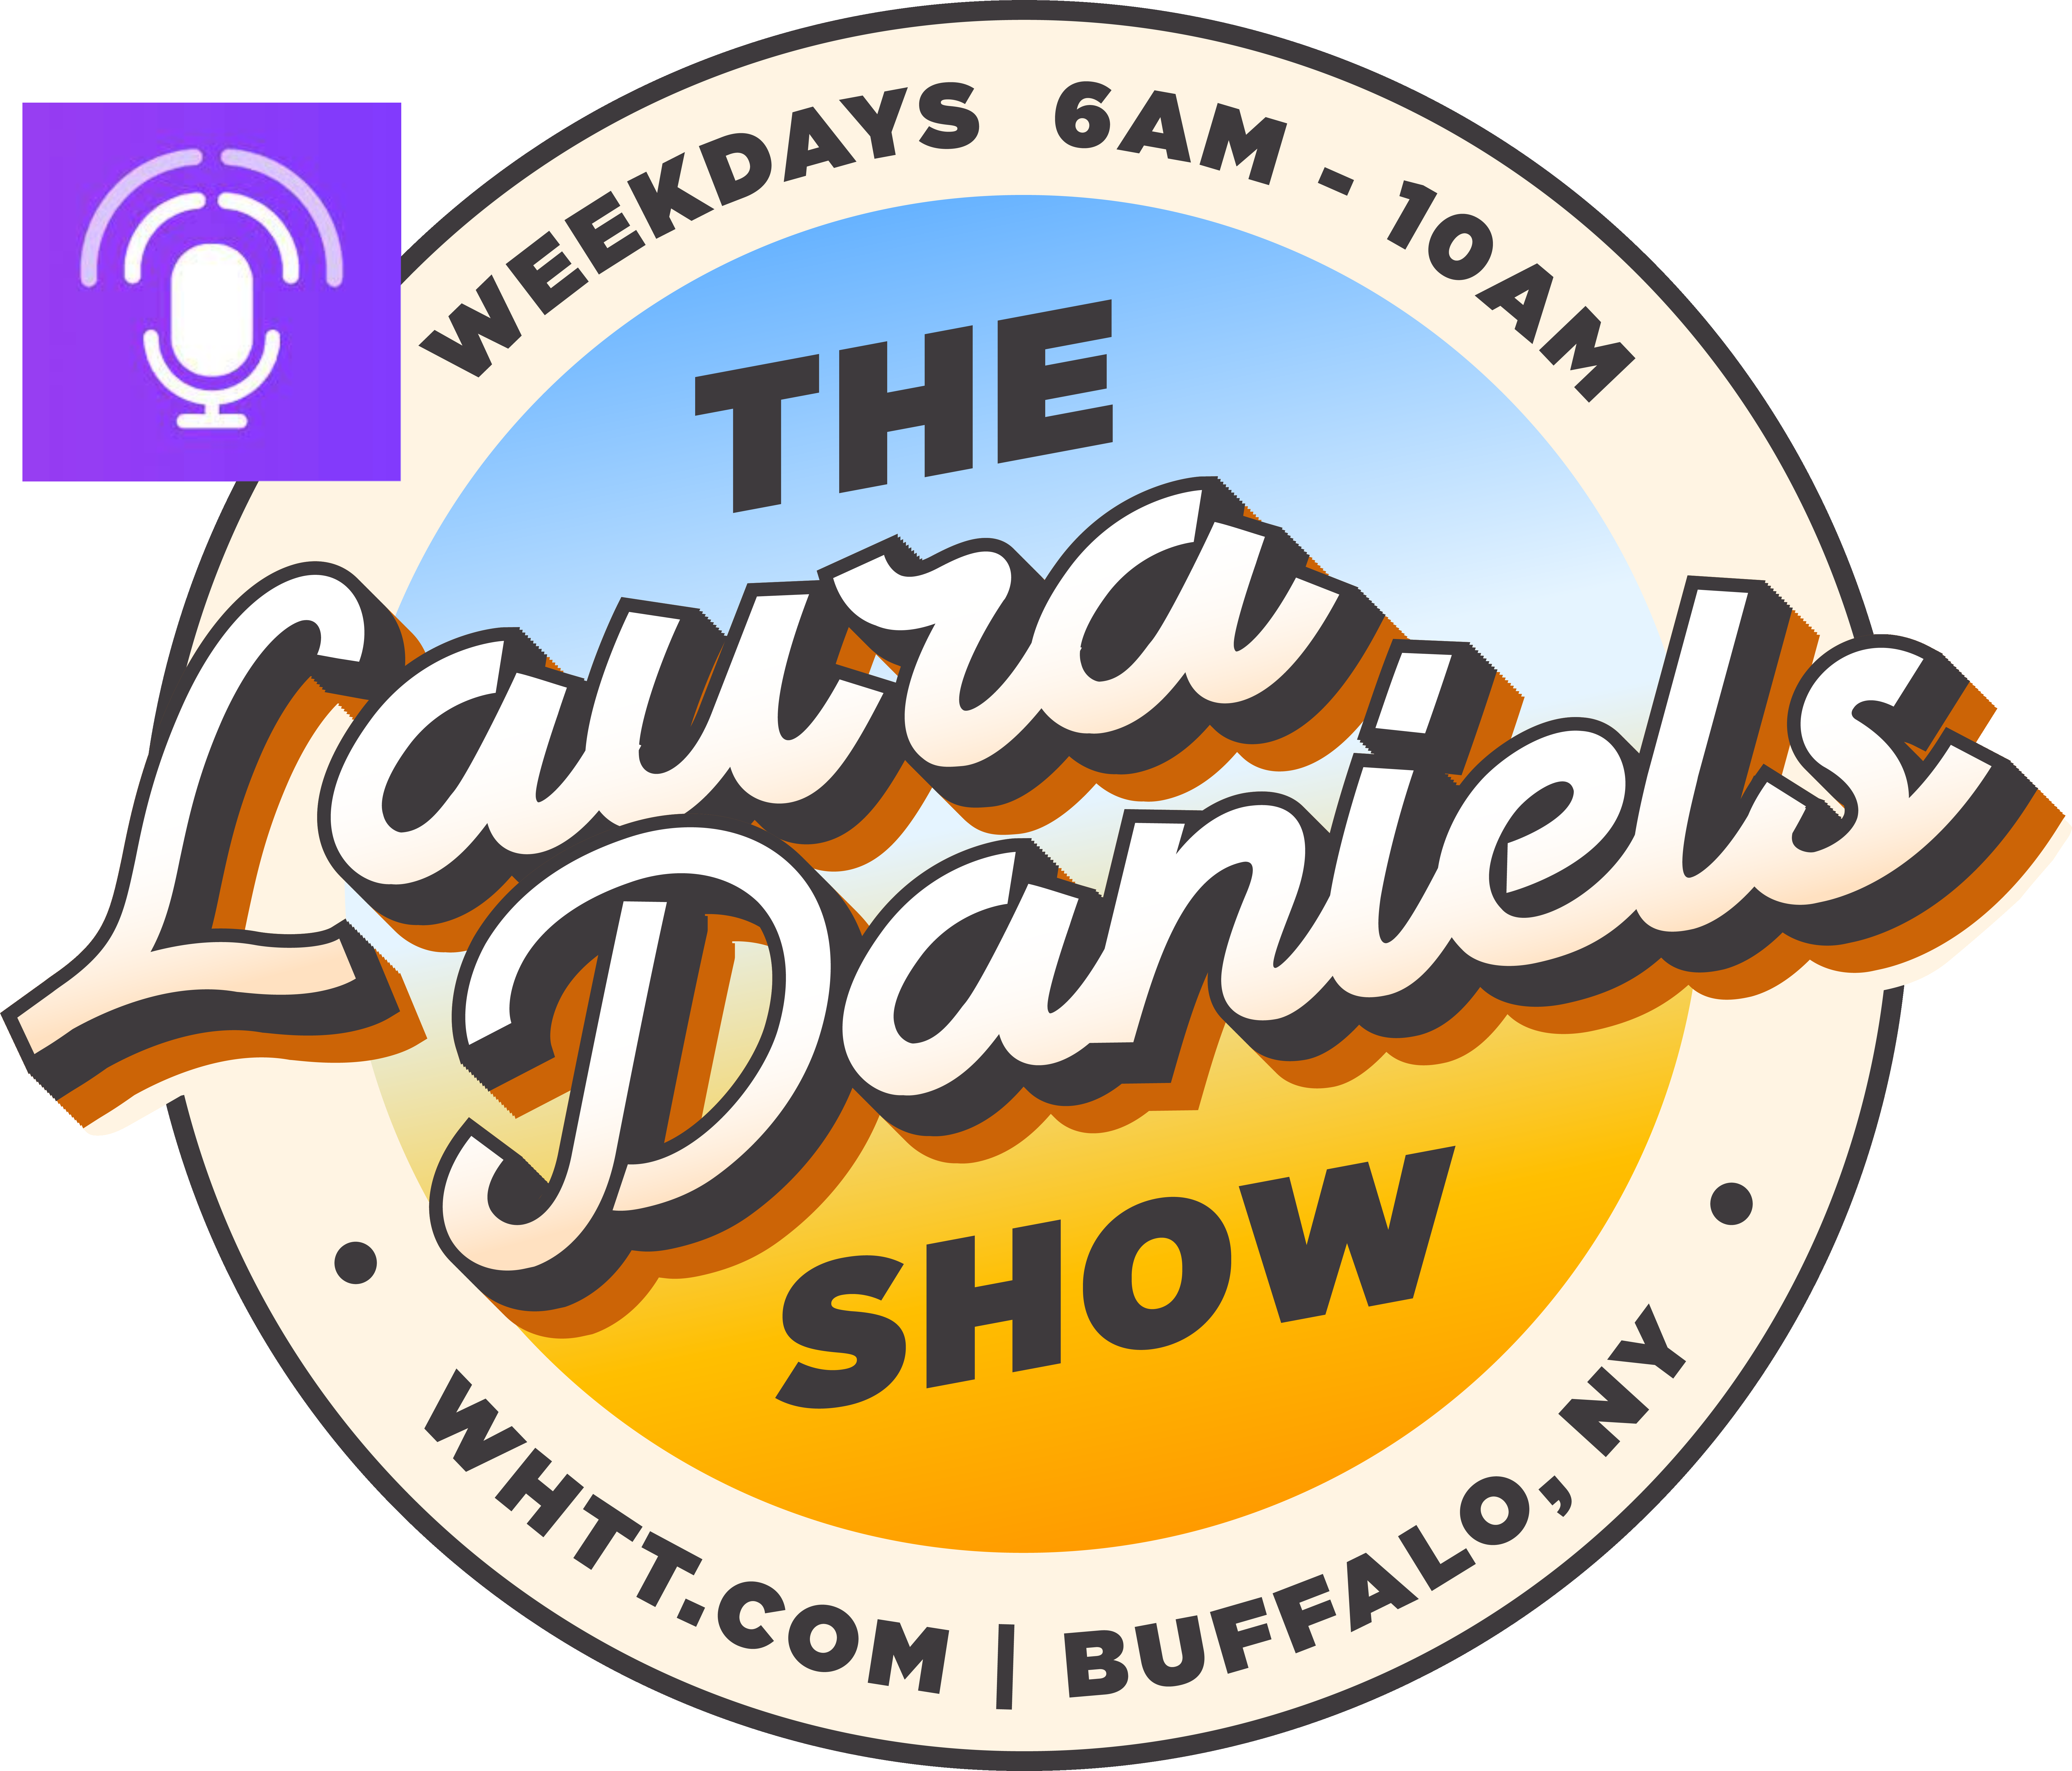 PODCAST: The Show After the Show w/ Laura Daniels, Episode 1